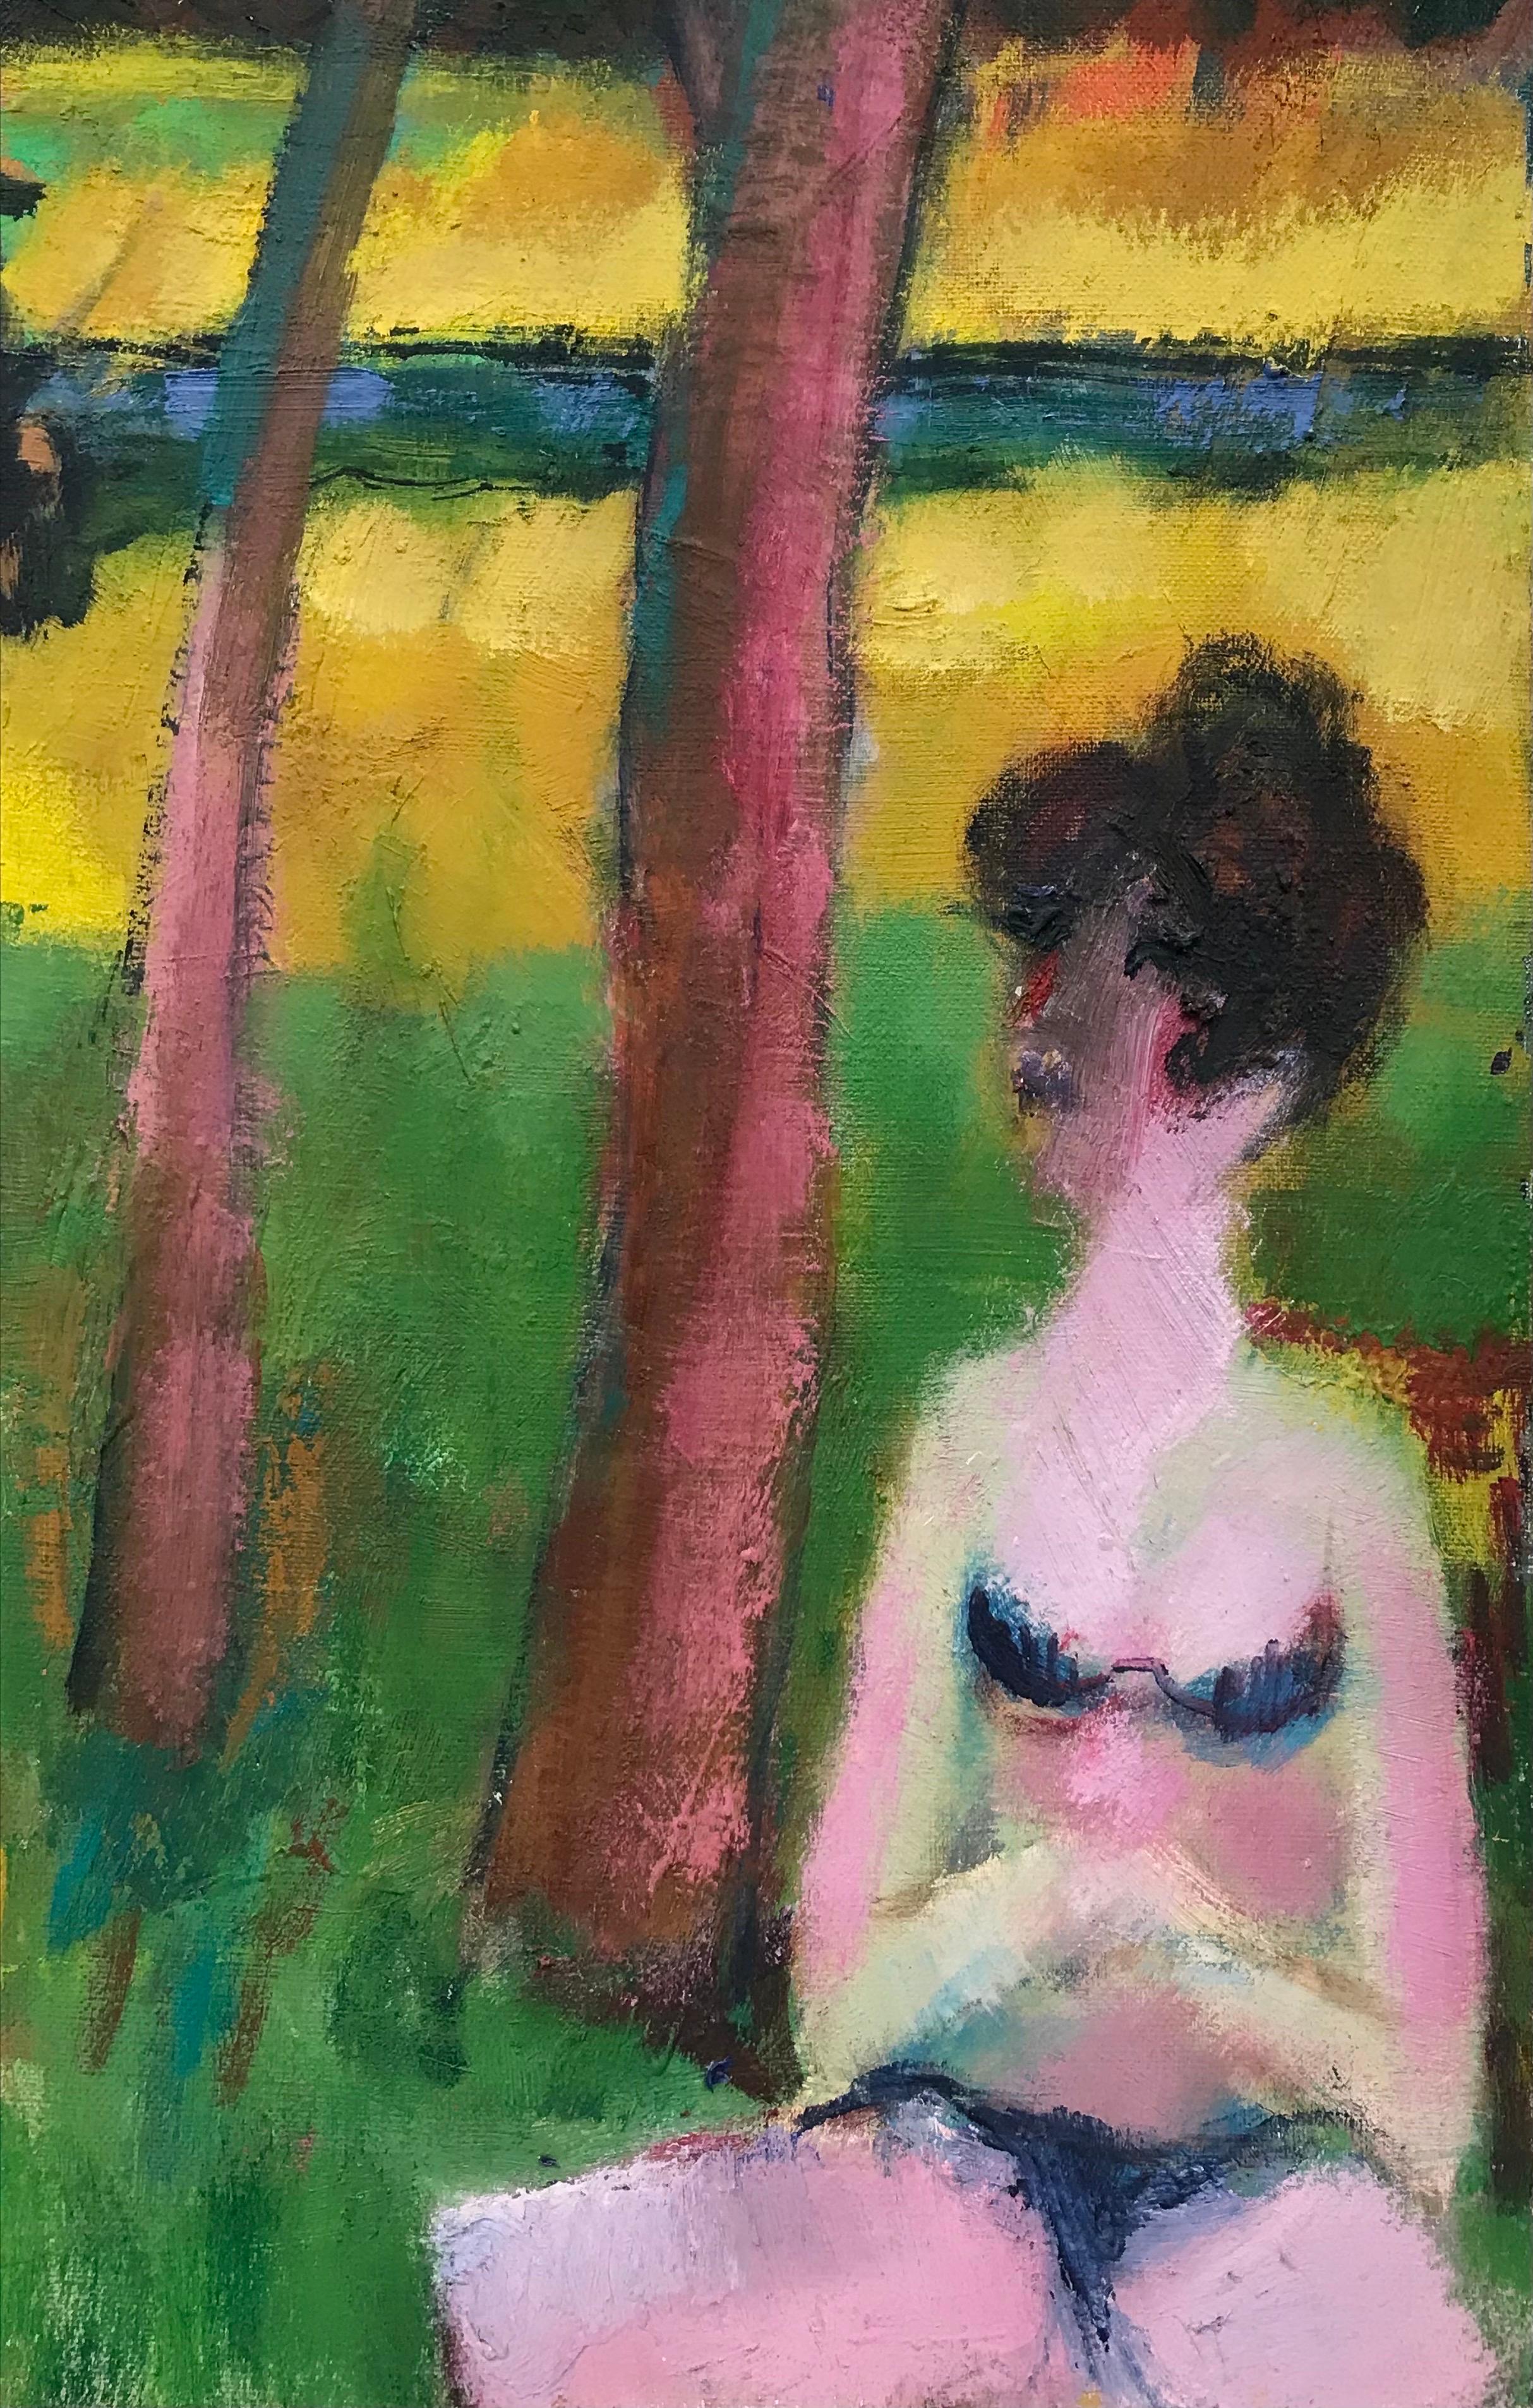 Artist/ School: French School, late 20th century, indistinctly signed

Title: Modernist painting depicting a lady in a bikini sunbathing in a meadow, river and anglers behind. 

Medium: oil on canvas, unframed

Canvas: 24 x 19.75 inches

Provenance: